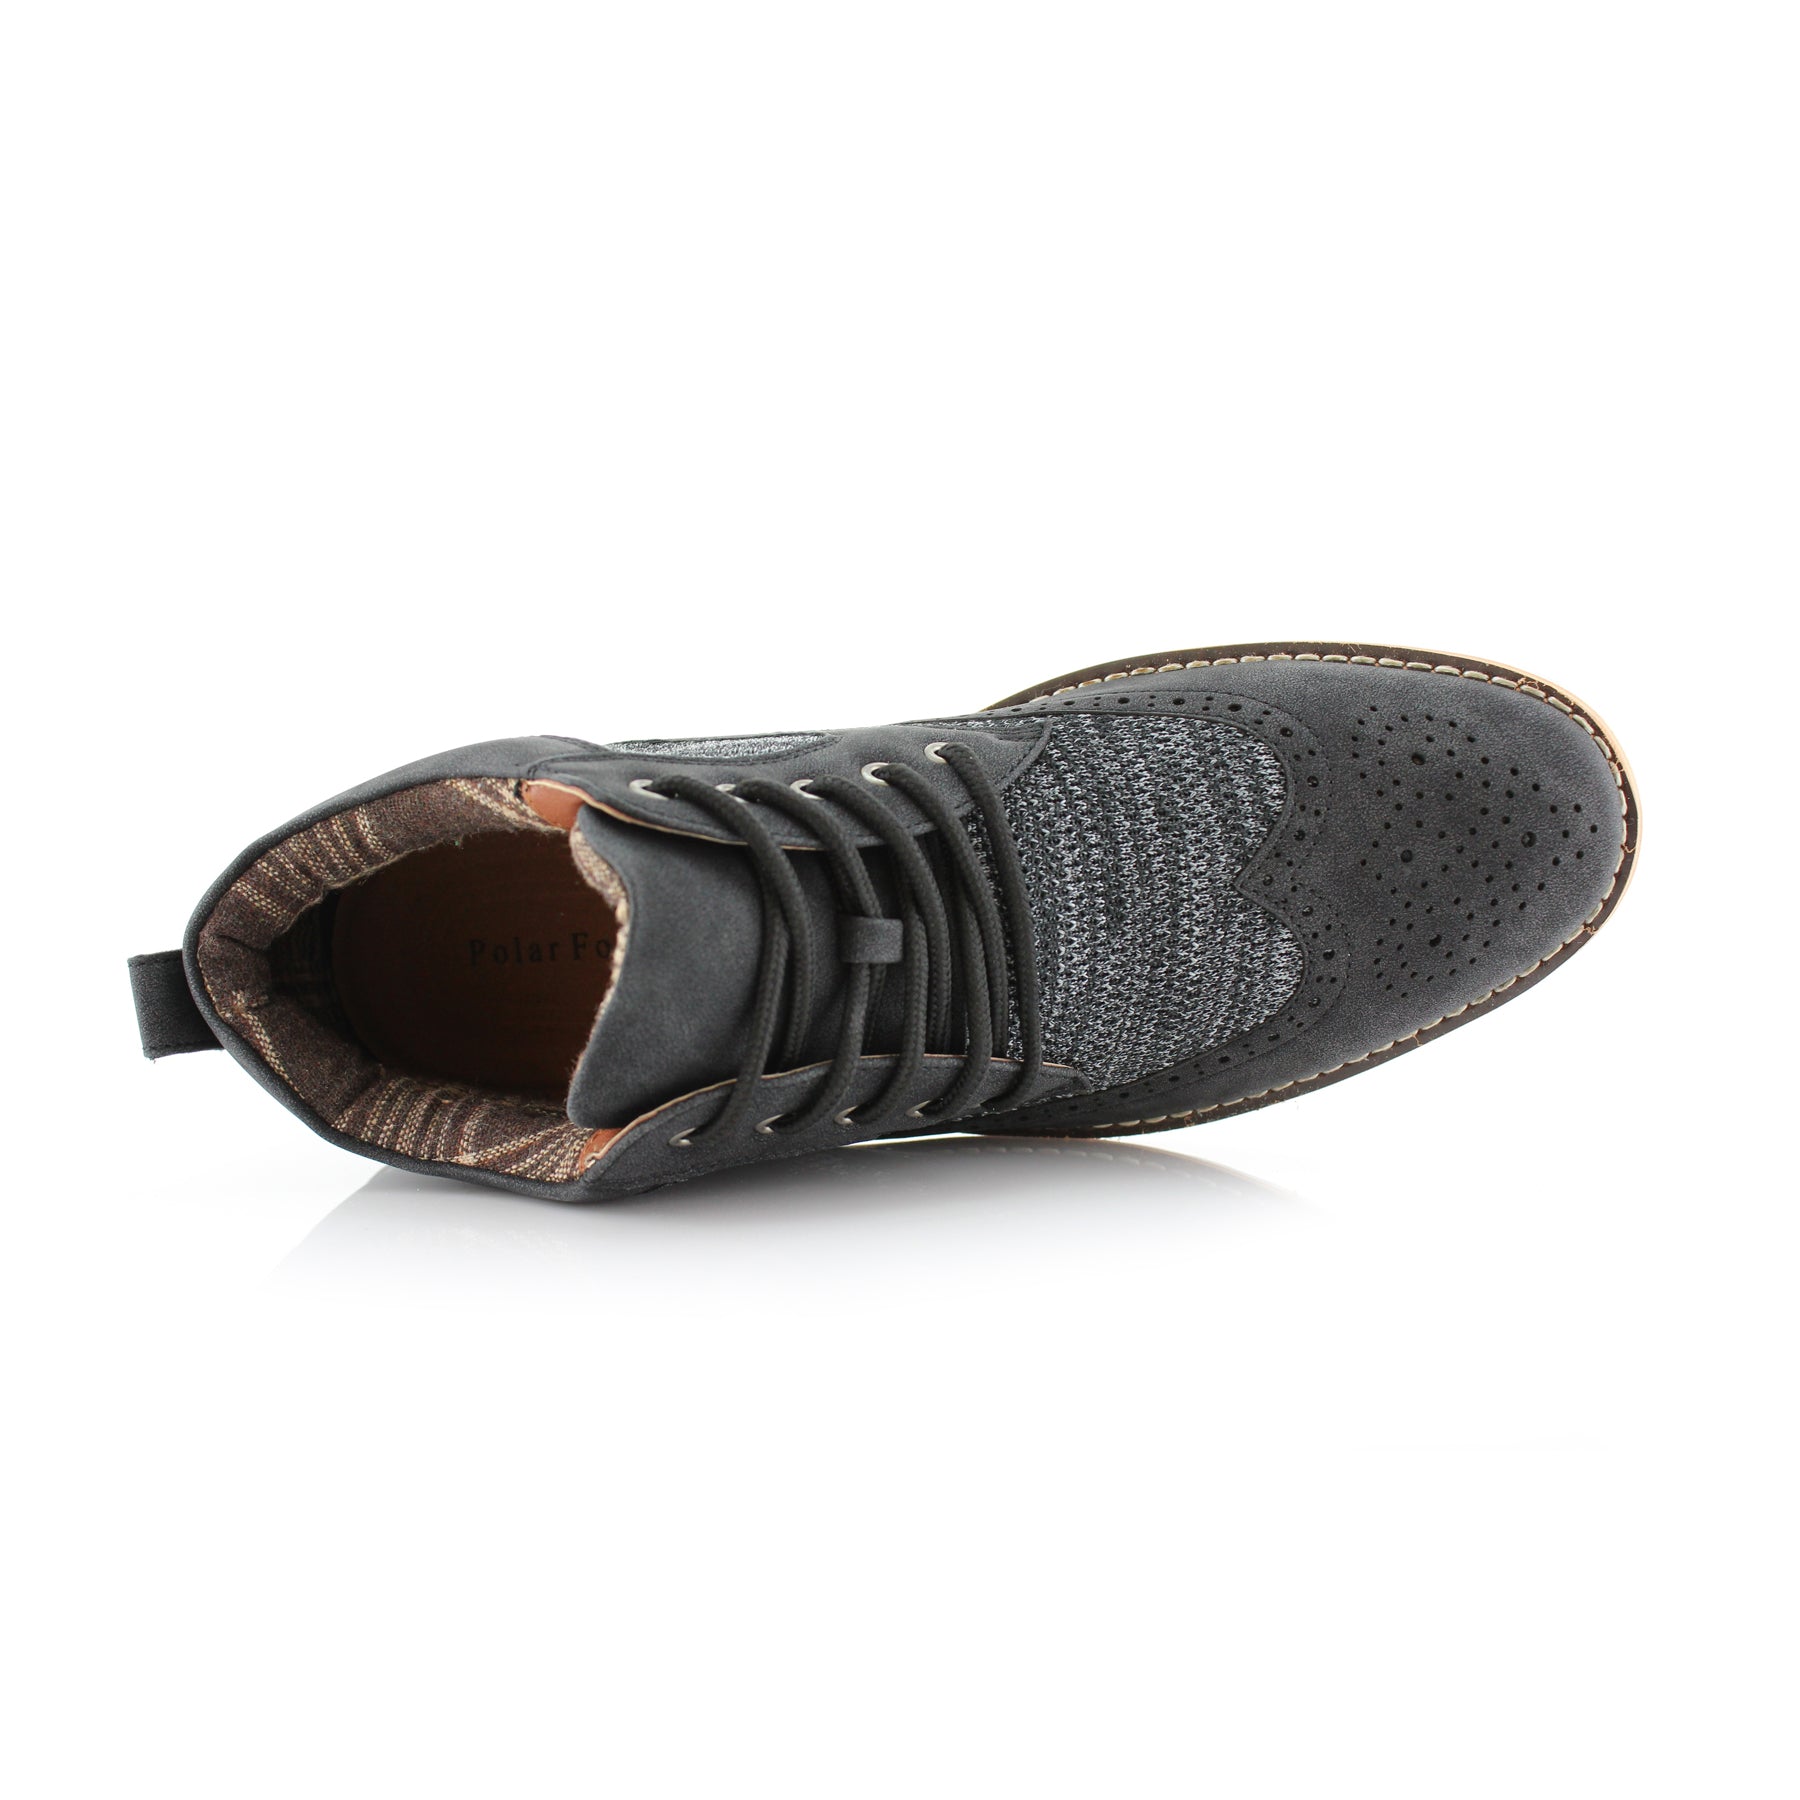 Duo-textured Mid-Top Wingtip Sneaker | Colbert by Polar Fox | Conal Footwear | Top-Down Angle View